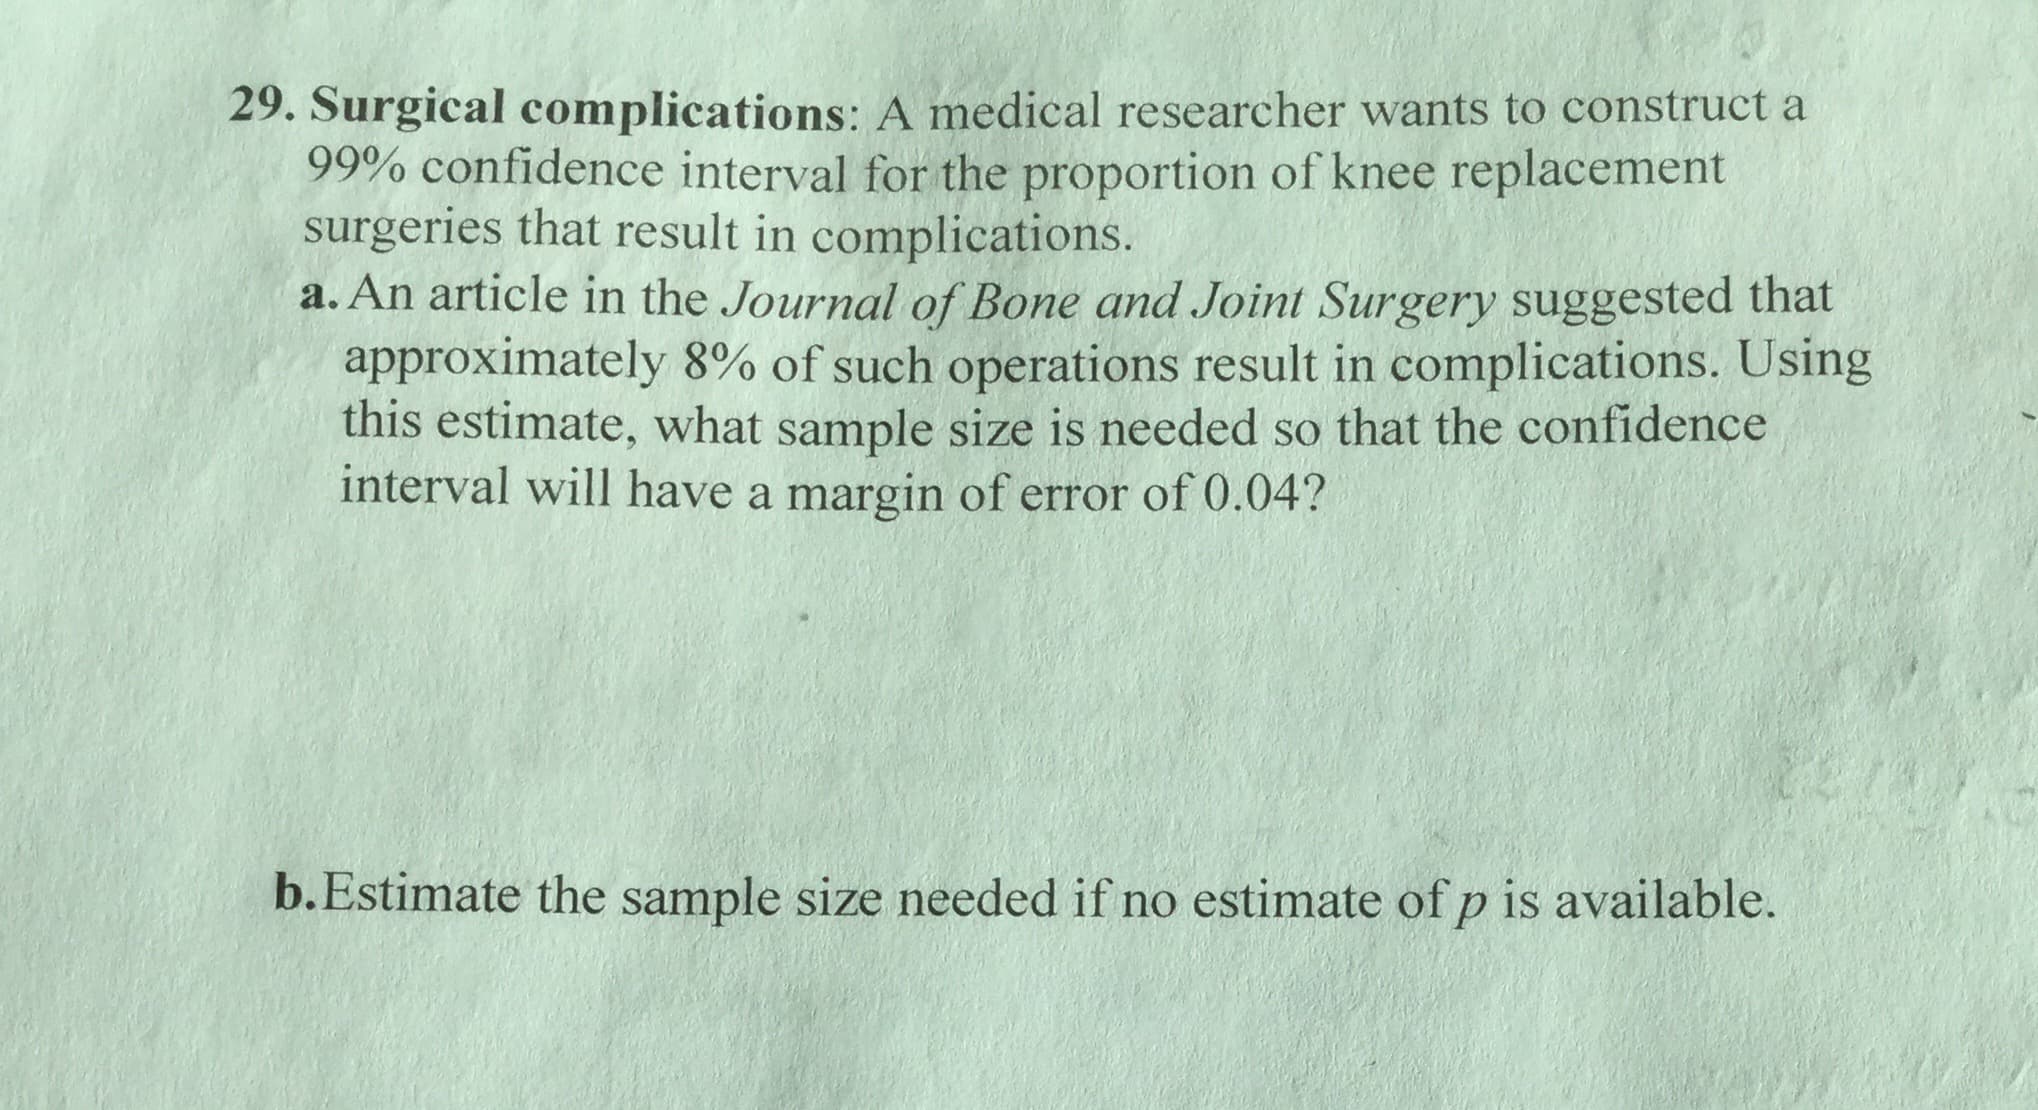 29. Surgical complications : A medical researcher wants to construct a
99% confidence interval for the proportion of knee replacement
surgeries that result in complications.
a. An article in the Journal of Bone and Joint Surgery suggested that
approximately 8% of such operations result in complications. Using
this estimate, what sample size is needed so that the confidence
interval will have a margin of error of 0.04?
b.Estimate the sample size needed if no estimate of p is available.
